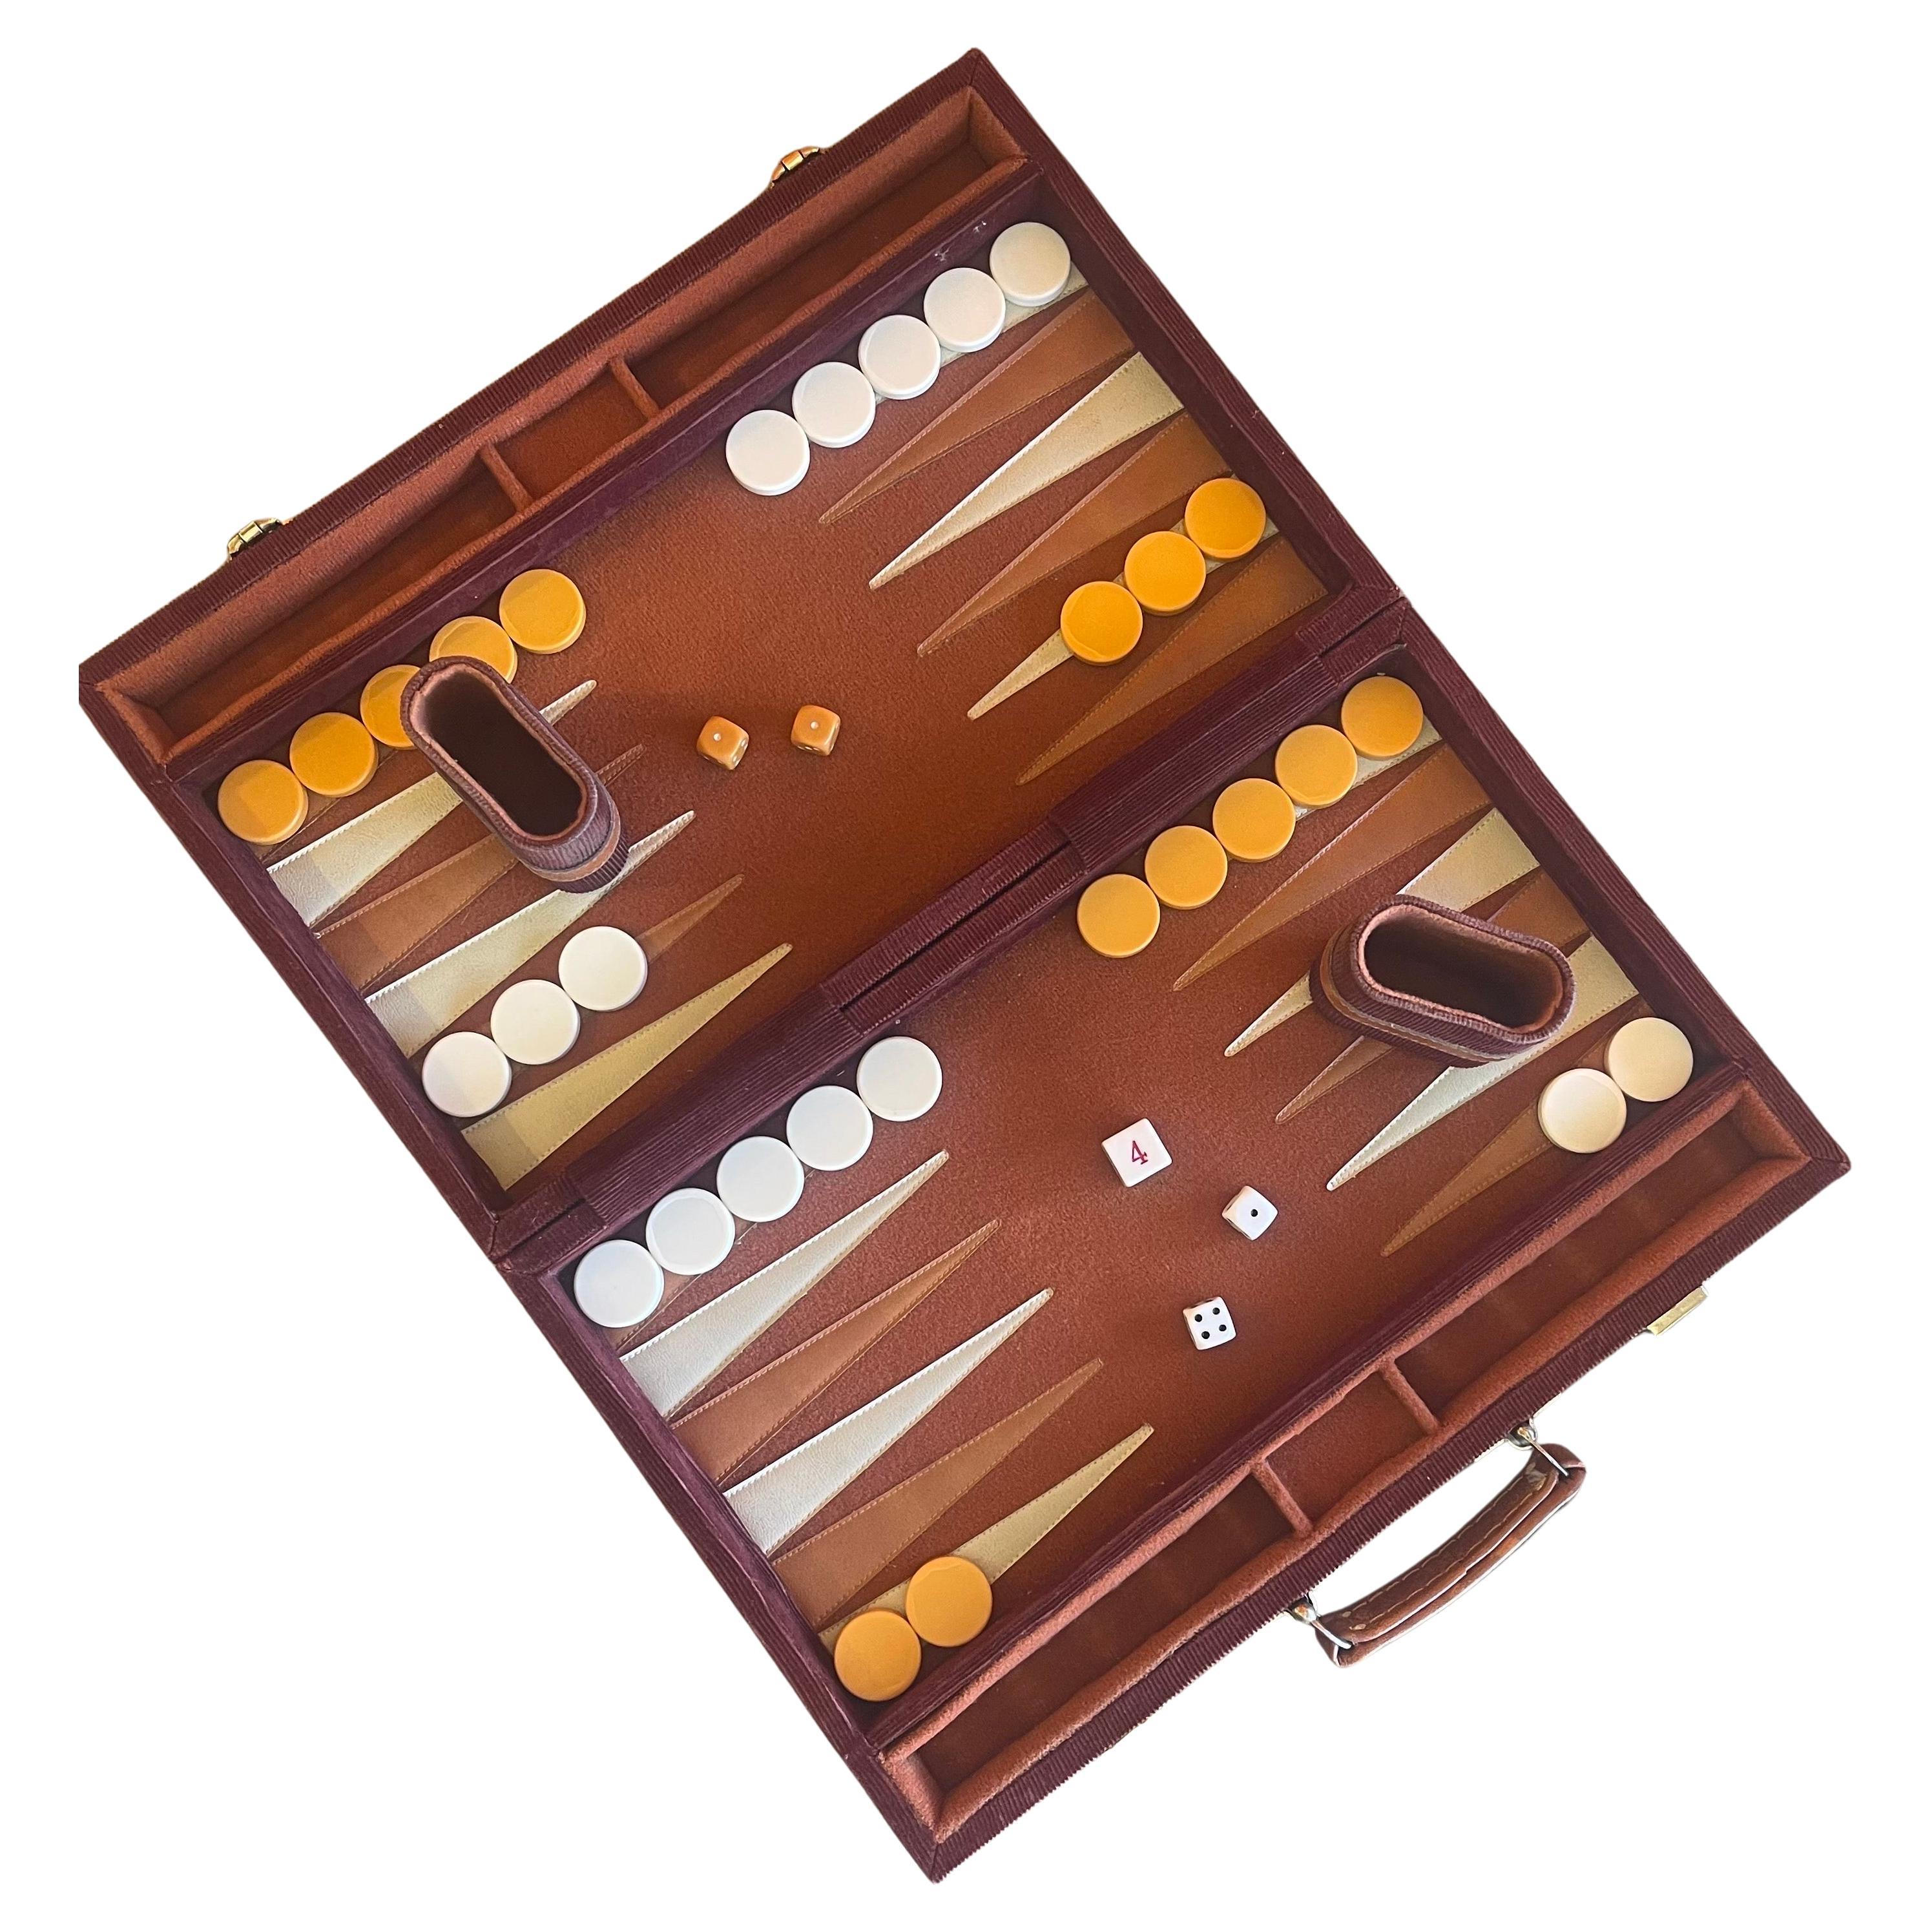 Vintage corduroy and bakelite backgammon set, circa 1970s. Set is complete with a foldable case / board with red corduroy fabric, 30 bakelite checkers (white and butterscotch in color, 1.25